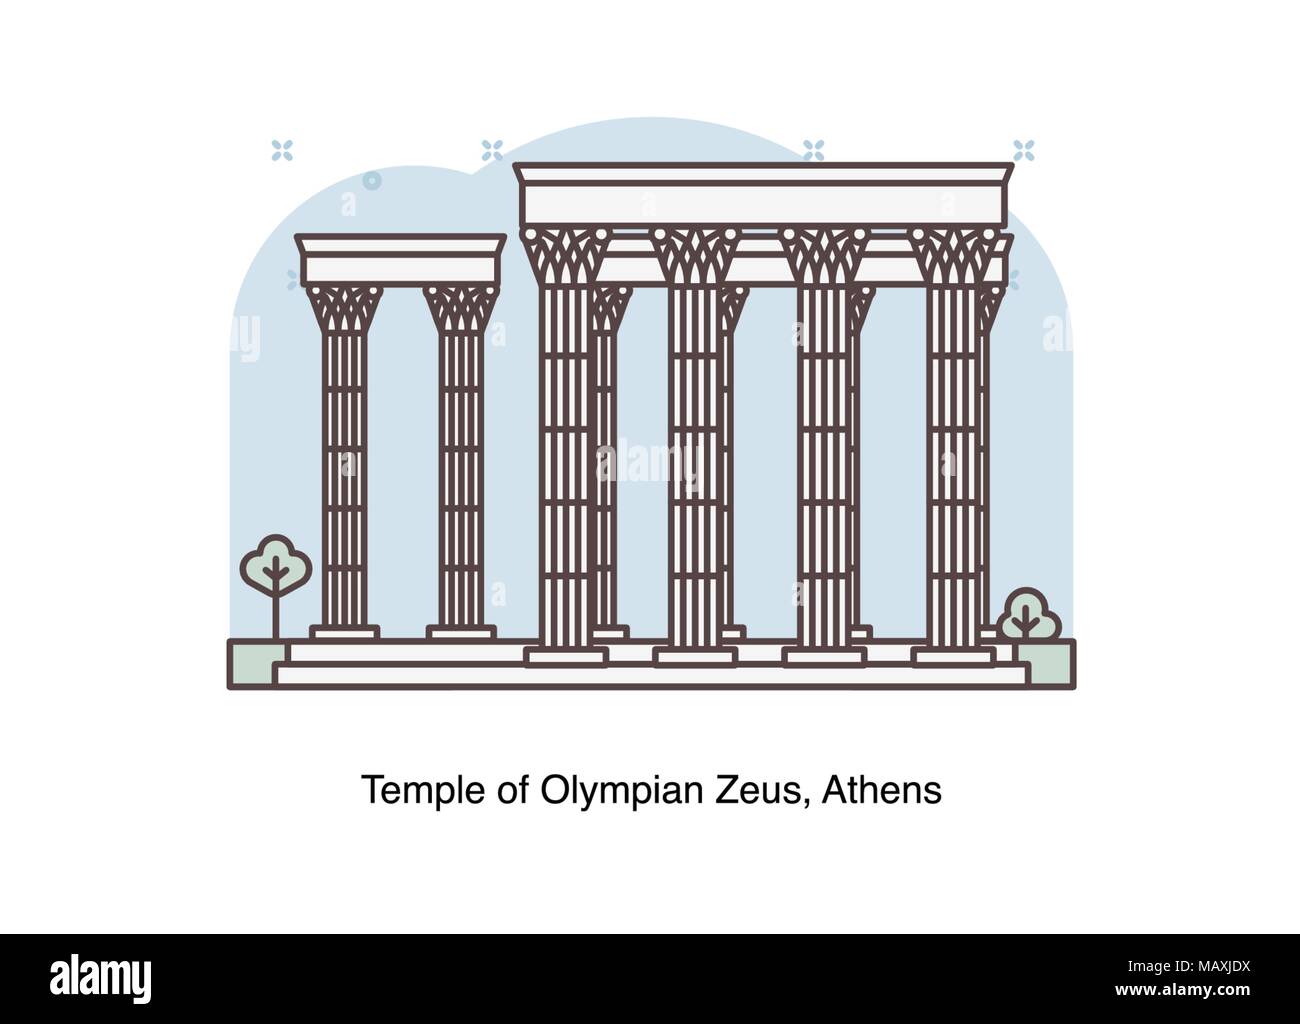 Vector line illustration of the Temple of Olympian Zeus, Athens, Greece. Stock Vector